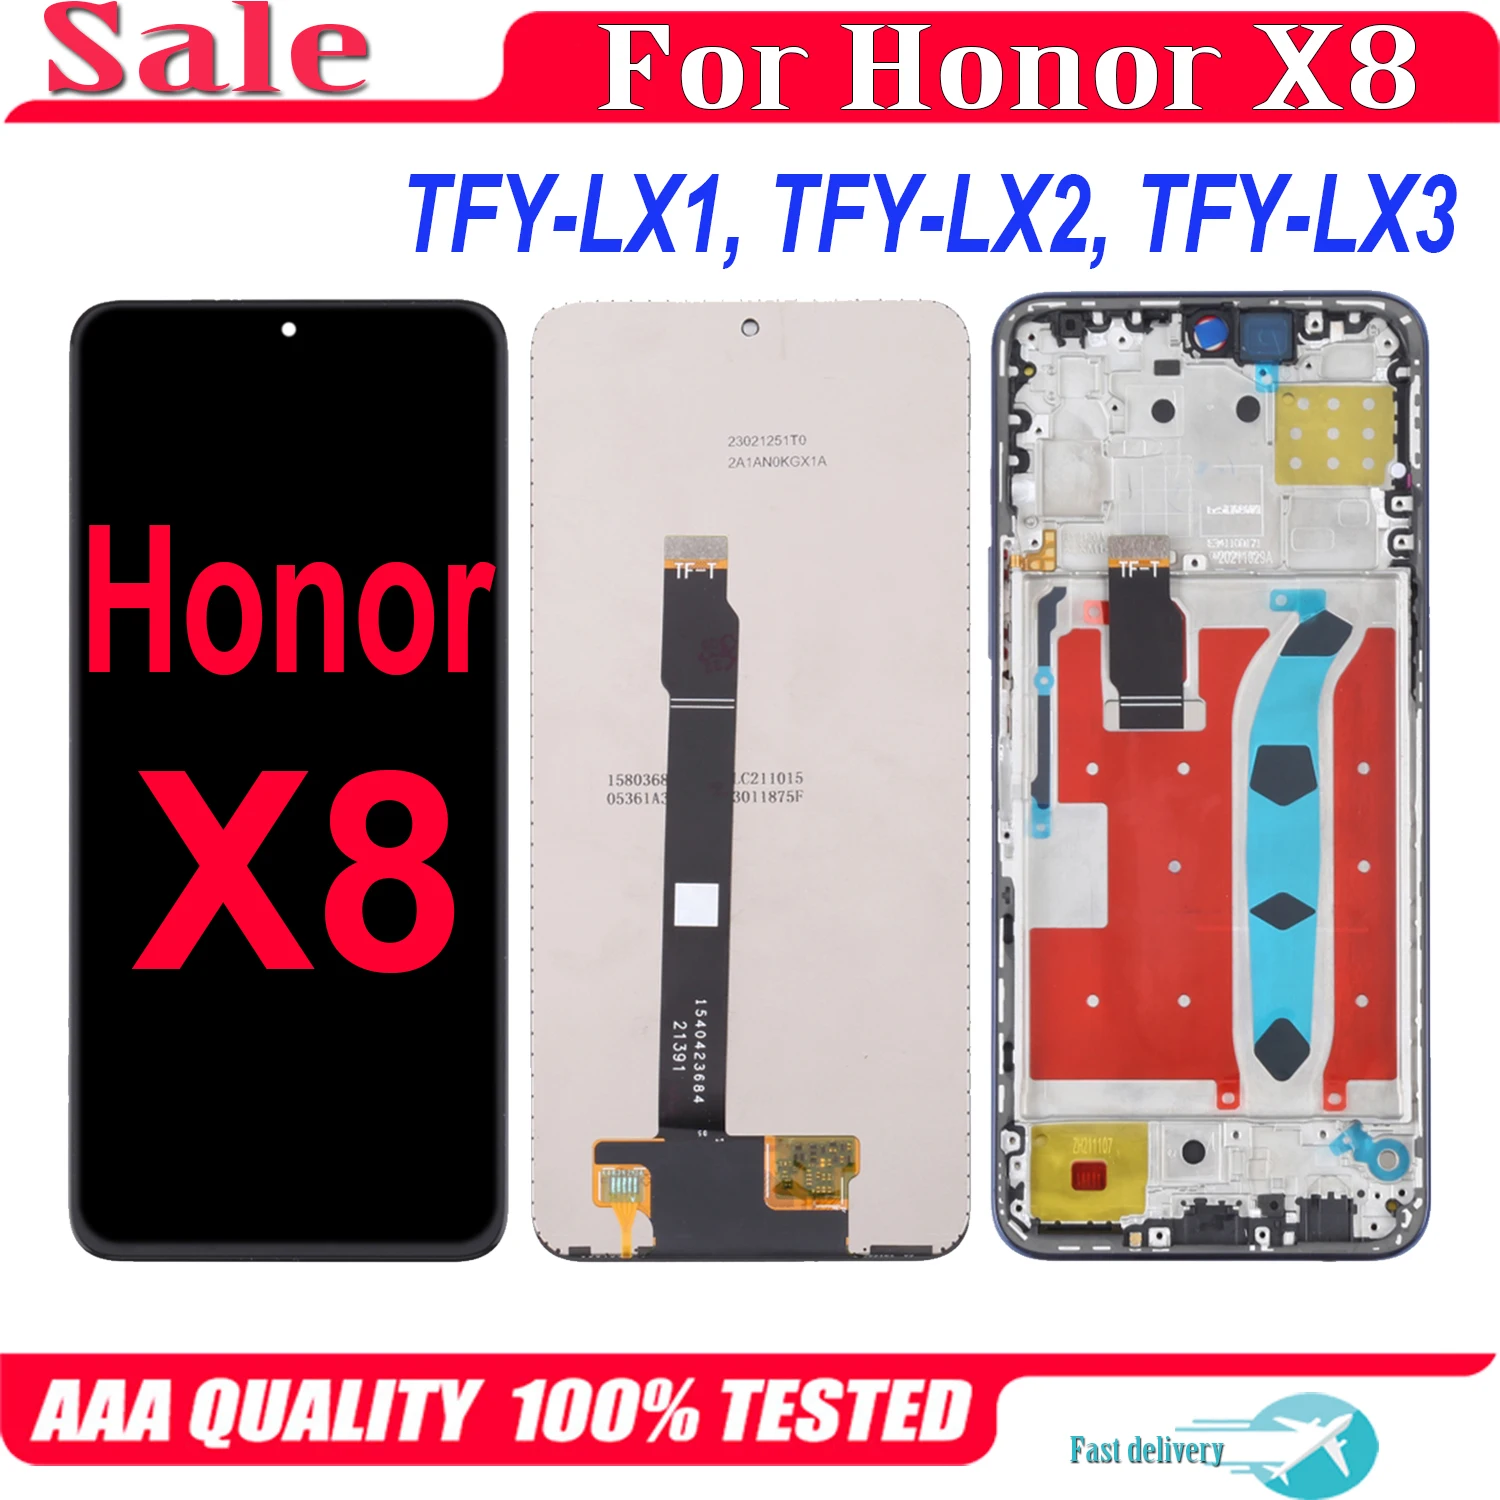 

Original For Huawei Honor X8 HonorX8 5G TFY-LX1 TFY-LX2 TFY-LX3 VNE-N41 LCD Display Touch Screen Replacement Digitizer Assembly